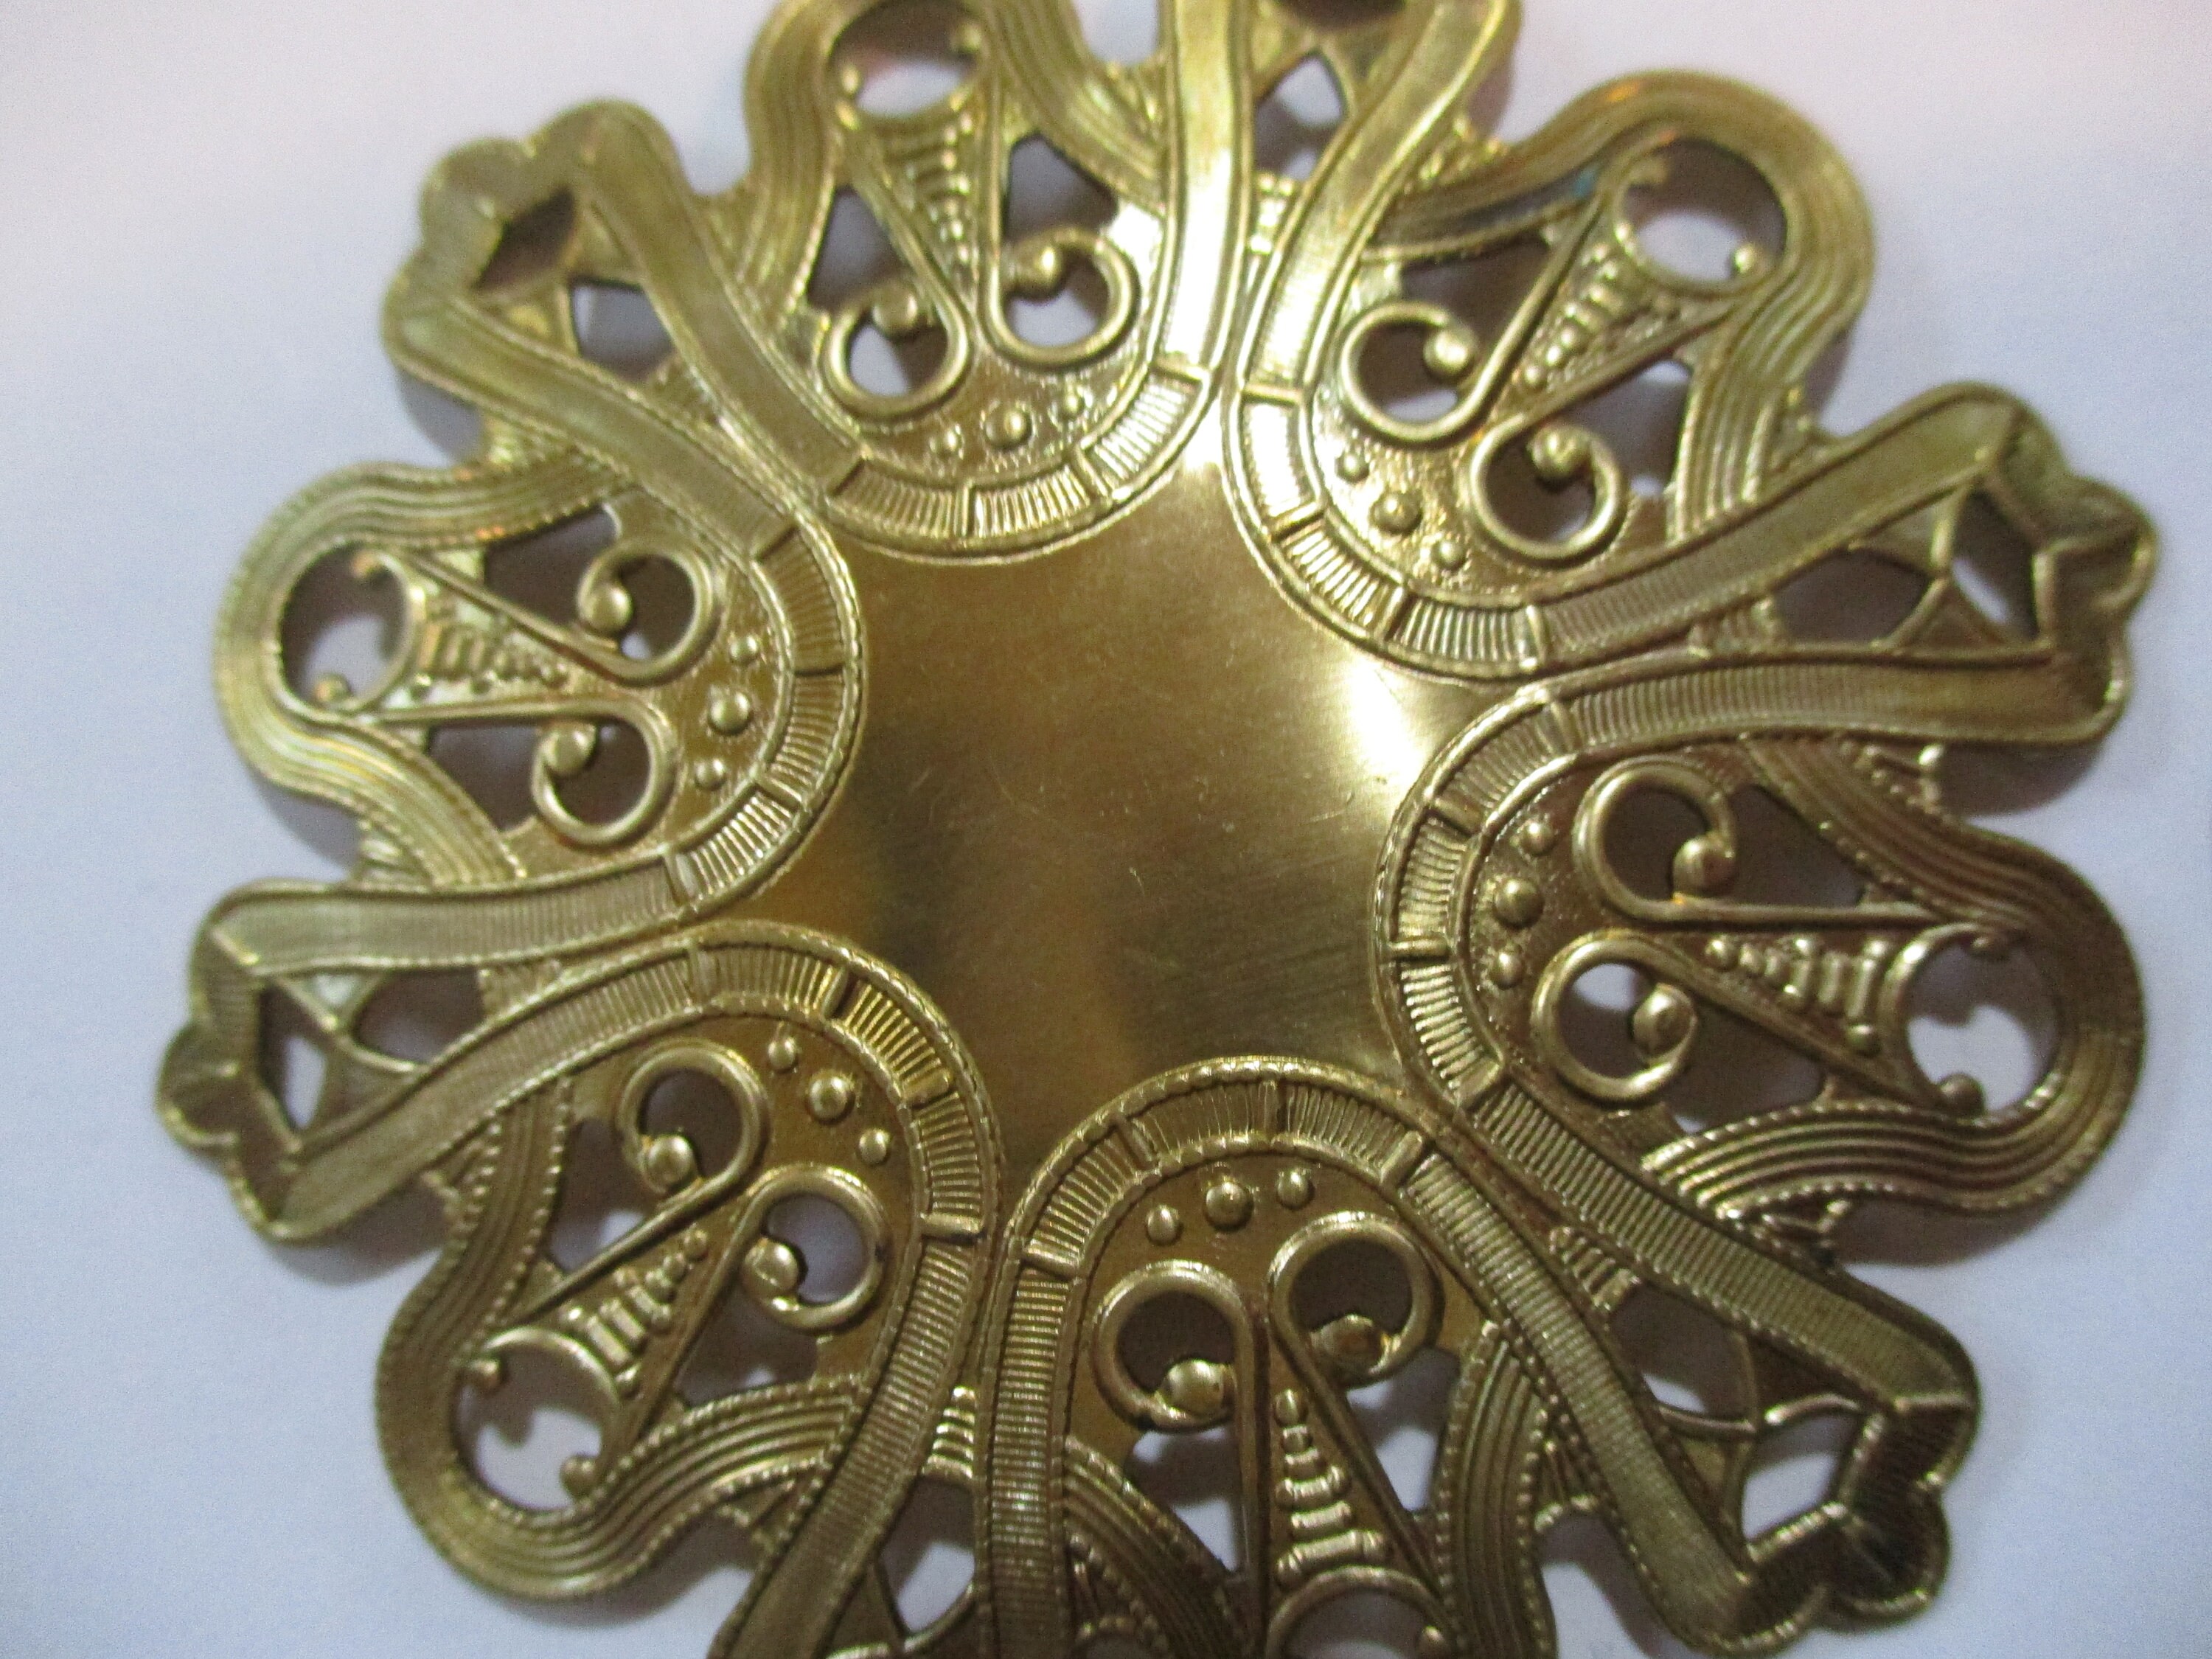 Vintage Abstract Hammered Stamped Brass Arts & Crafts Movement Design Open Work Medallion/Jewelry Component/Embellishment Round 52mm 1 Pc.